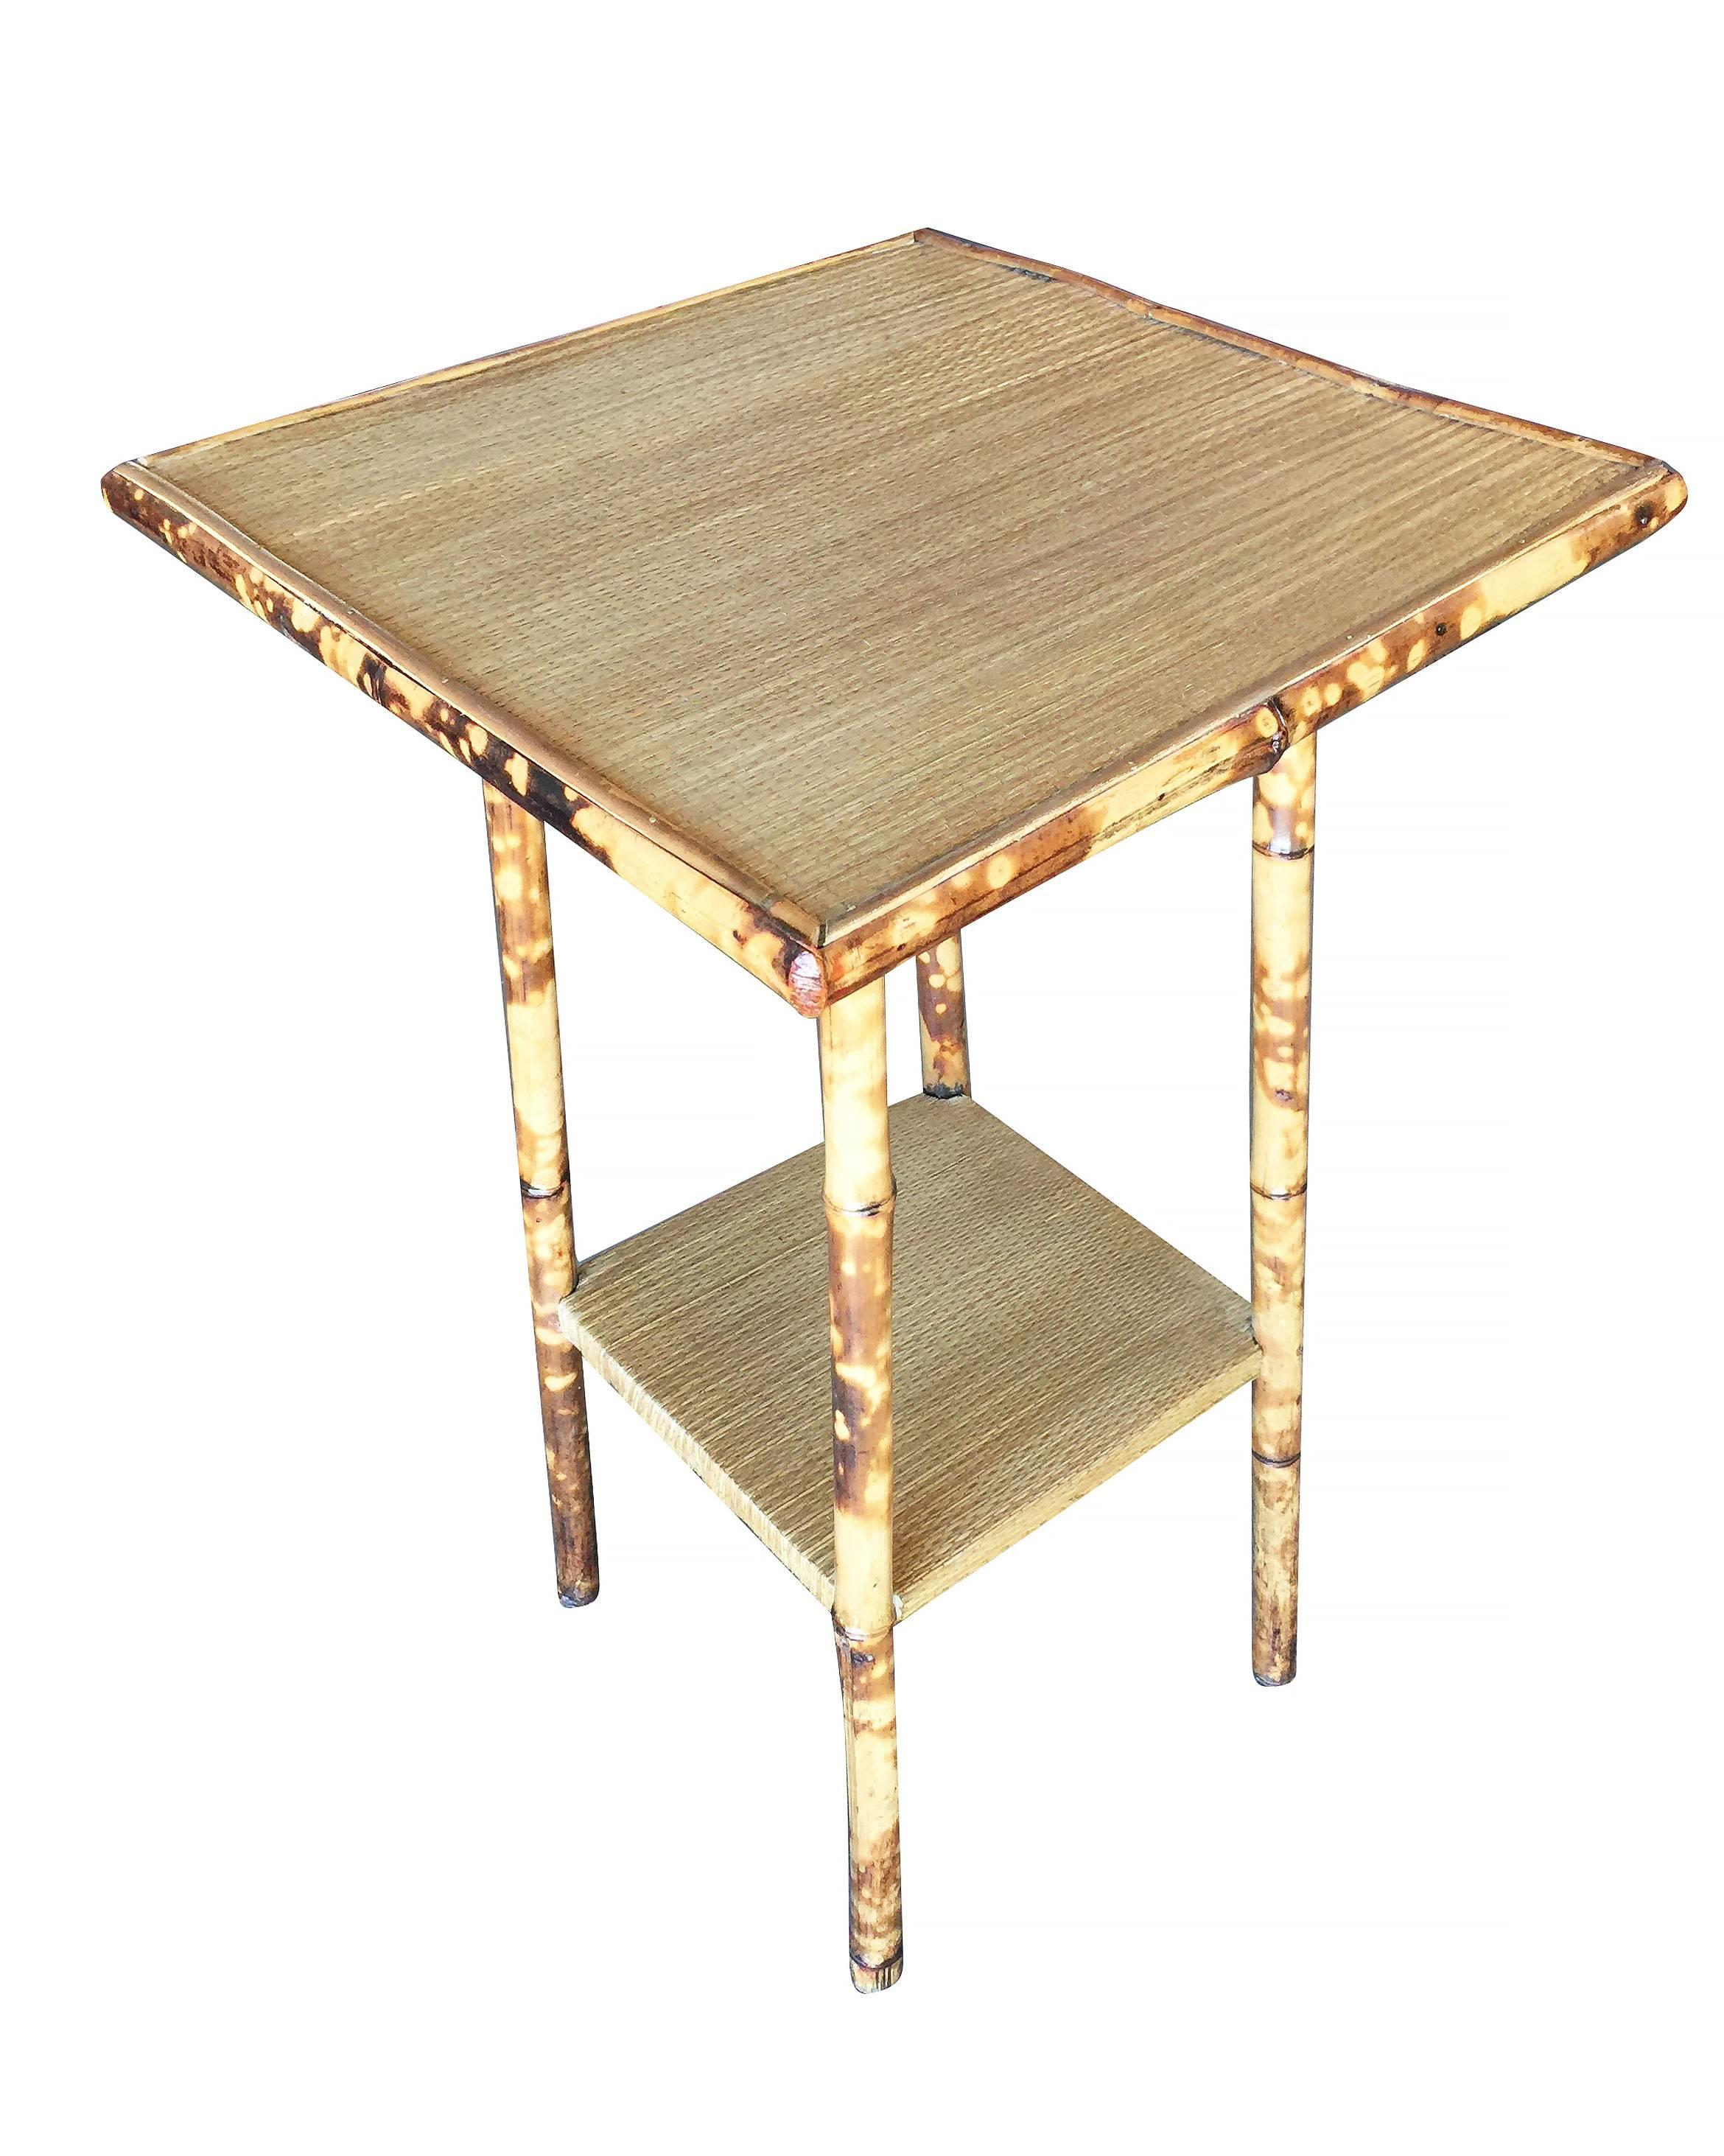 Antique tiger bamboo straight legs pedestal side table with rice mat top and secondary bottom shelf.


Restored to new for you.

All rattan, bamboo and wicker furniture has been painstakingly refurbished to the highest standards with the best